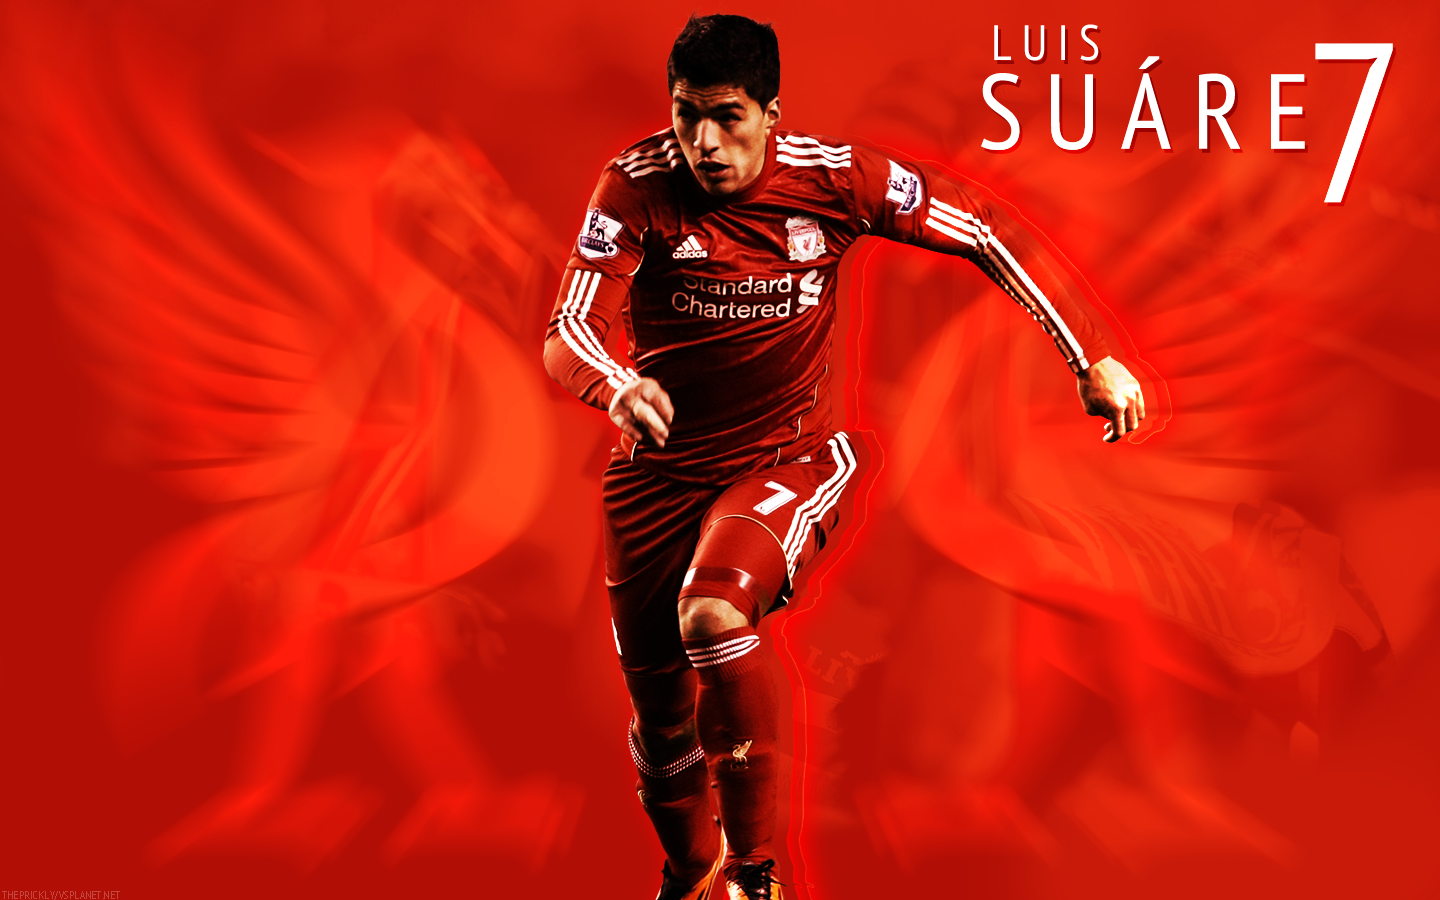 Luis Suarez Wallpapers High Resolution and Quality Download